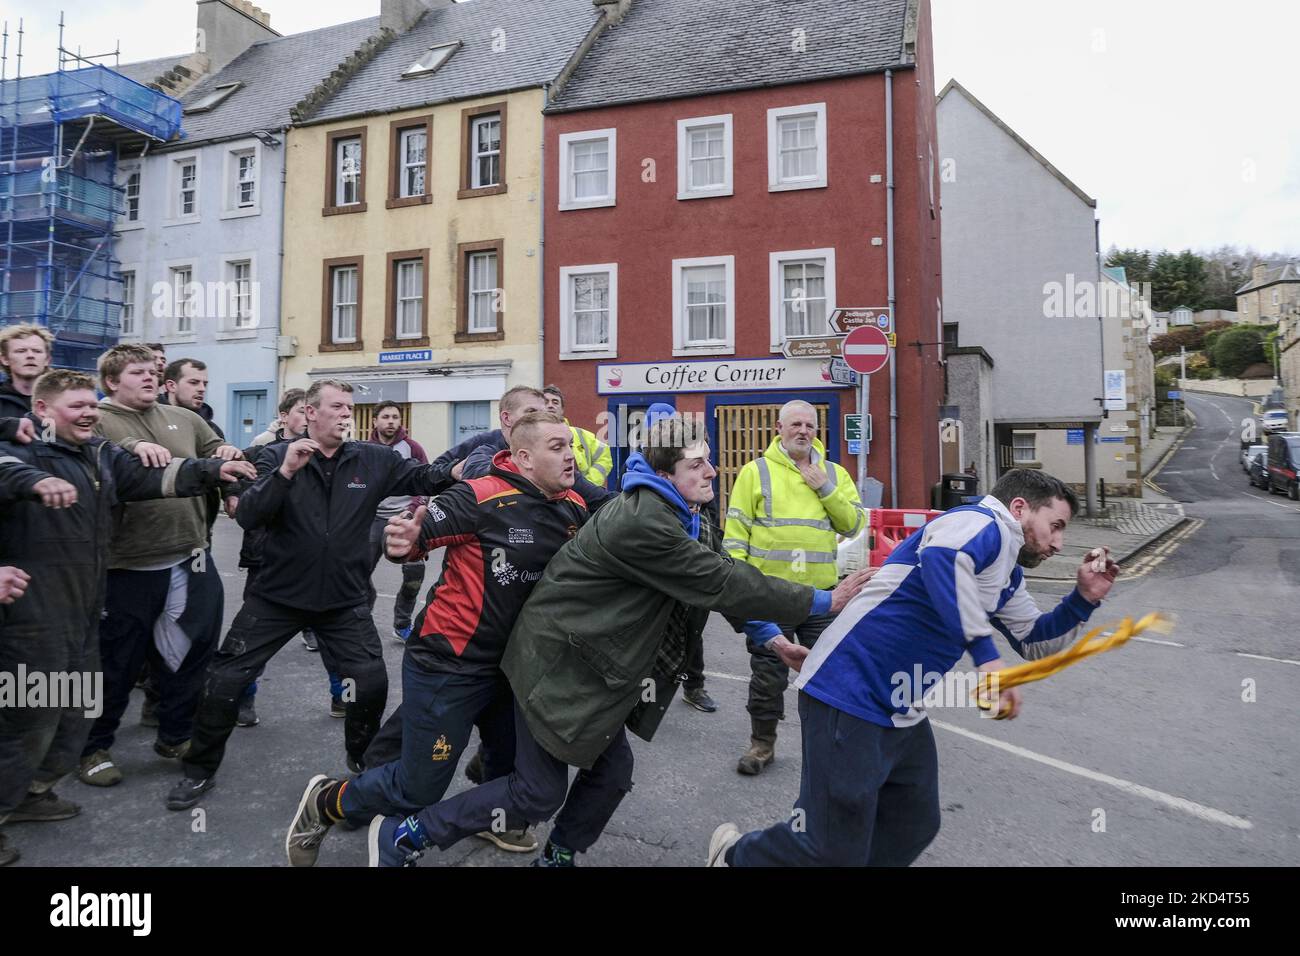 Jedburgh, Thursday 10 March 2022. A man runs with the Ba after catching the â€œhailedâ€ â€œBaâ€ during the annual 'Fastern Eve Handba' event in Jedburgh's High Street in the Scottish Borders on March 10, 2022 in Jedburgh, Scotland. The annual event, which started in the 1700's, takes place today and involves two teams, the Uppies (residents from the higher part of Jedburgh) and the Doonies (residents from the lower part of Jedburgh) getting the ball to either the top or bottom of the town. The ball, which is made of leather, stuffed with straw and decorated with ribbons is thrown into the cr Stock Photo